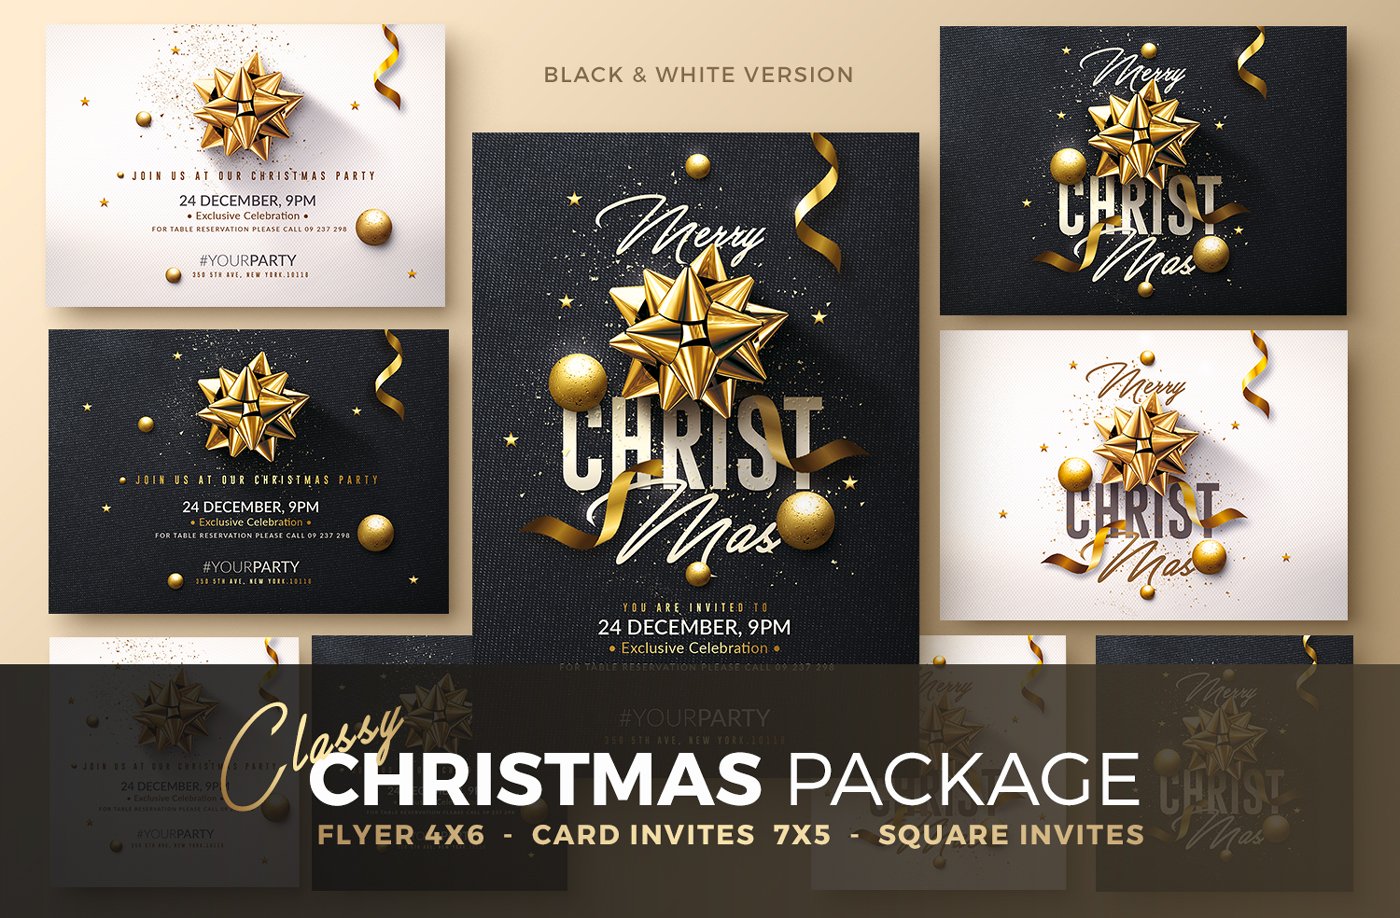 Christmas Invitation - Psd Package cover image.